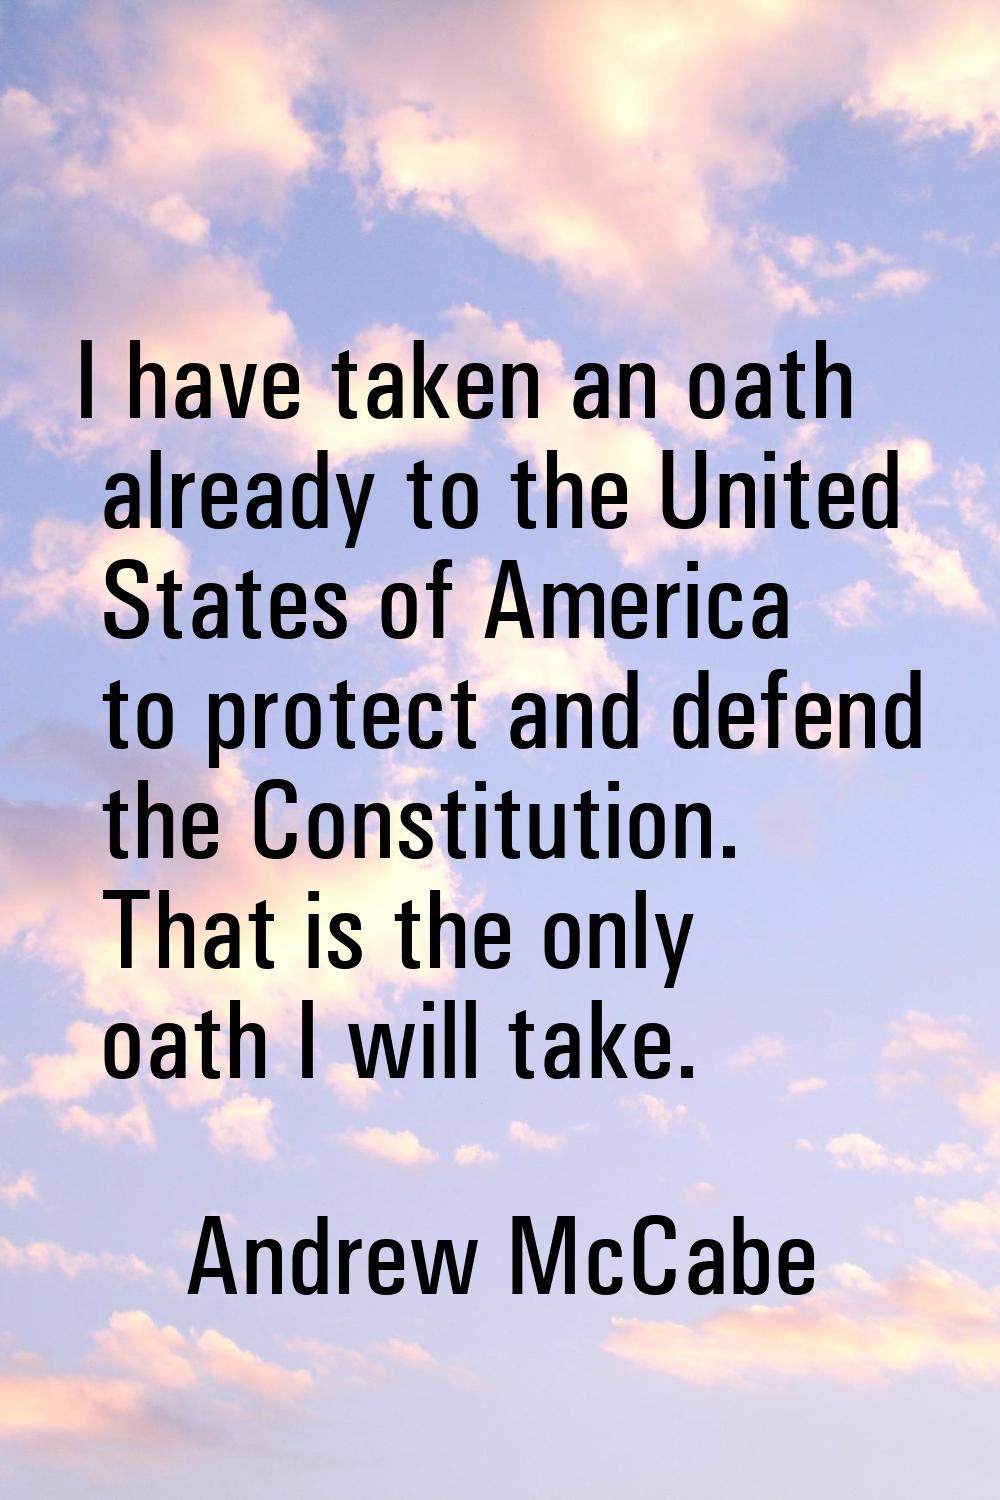 I have taken an oath already to the United States of America to protect and defend the Constitution